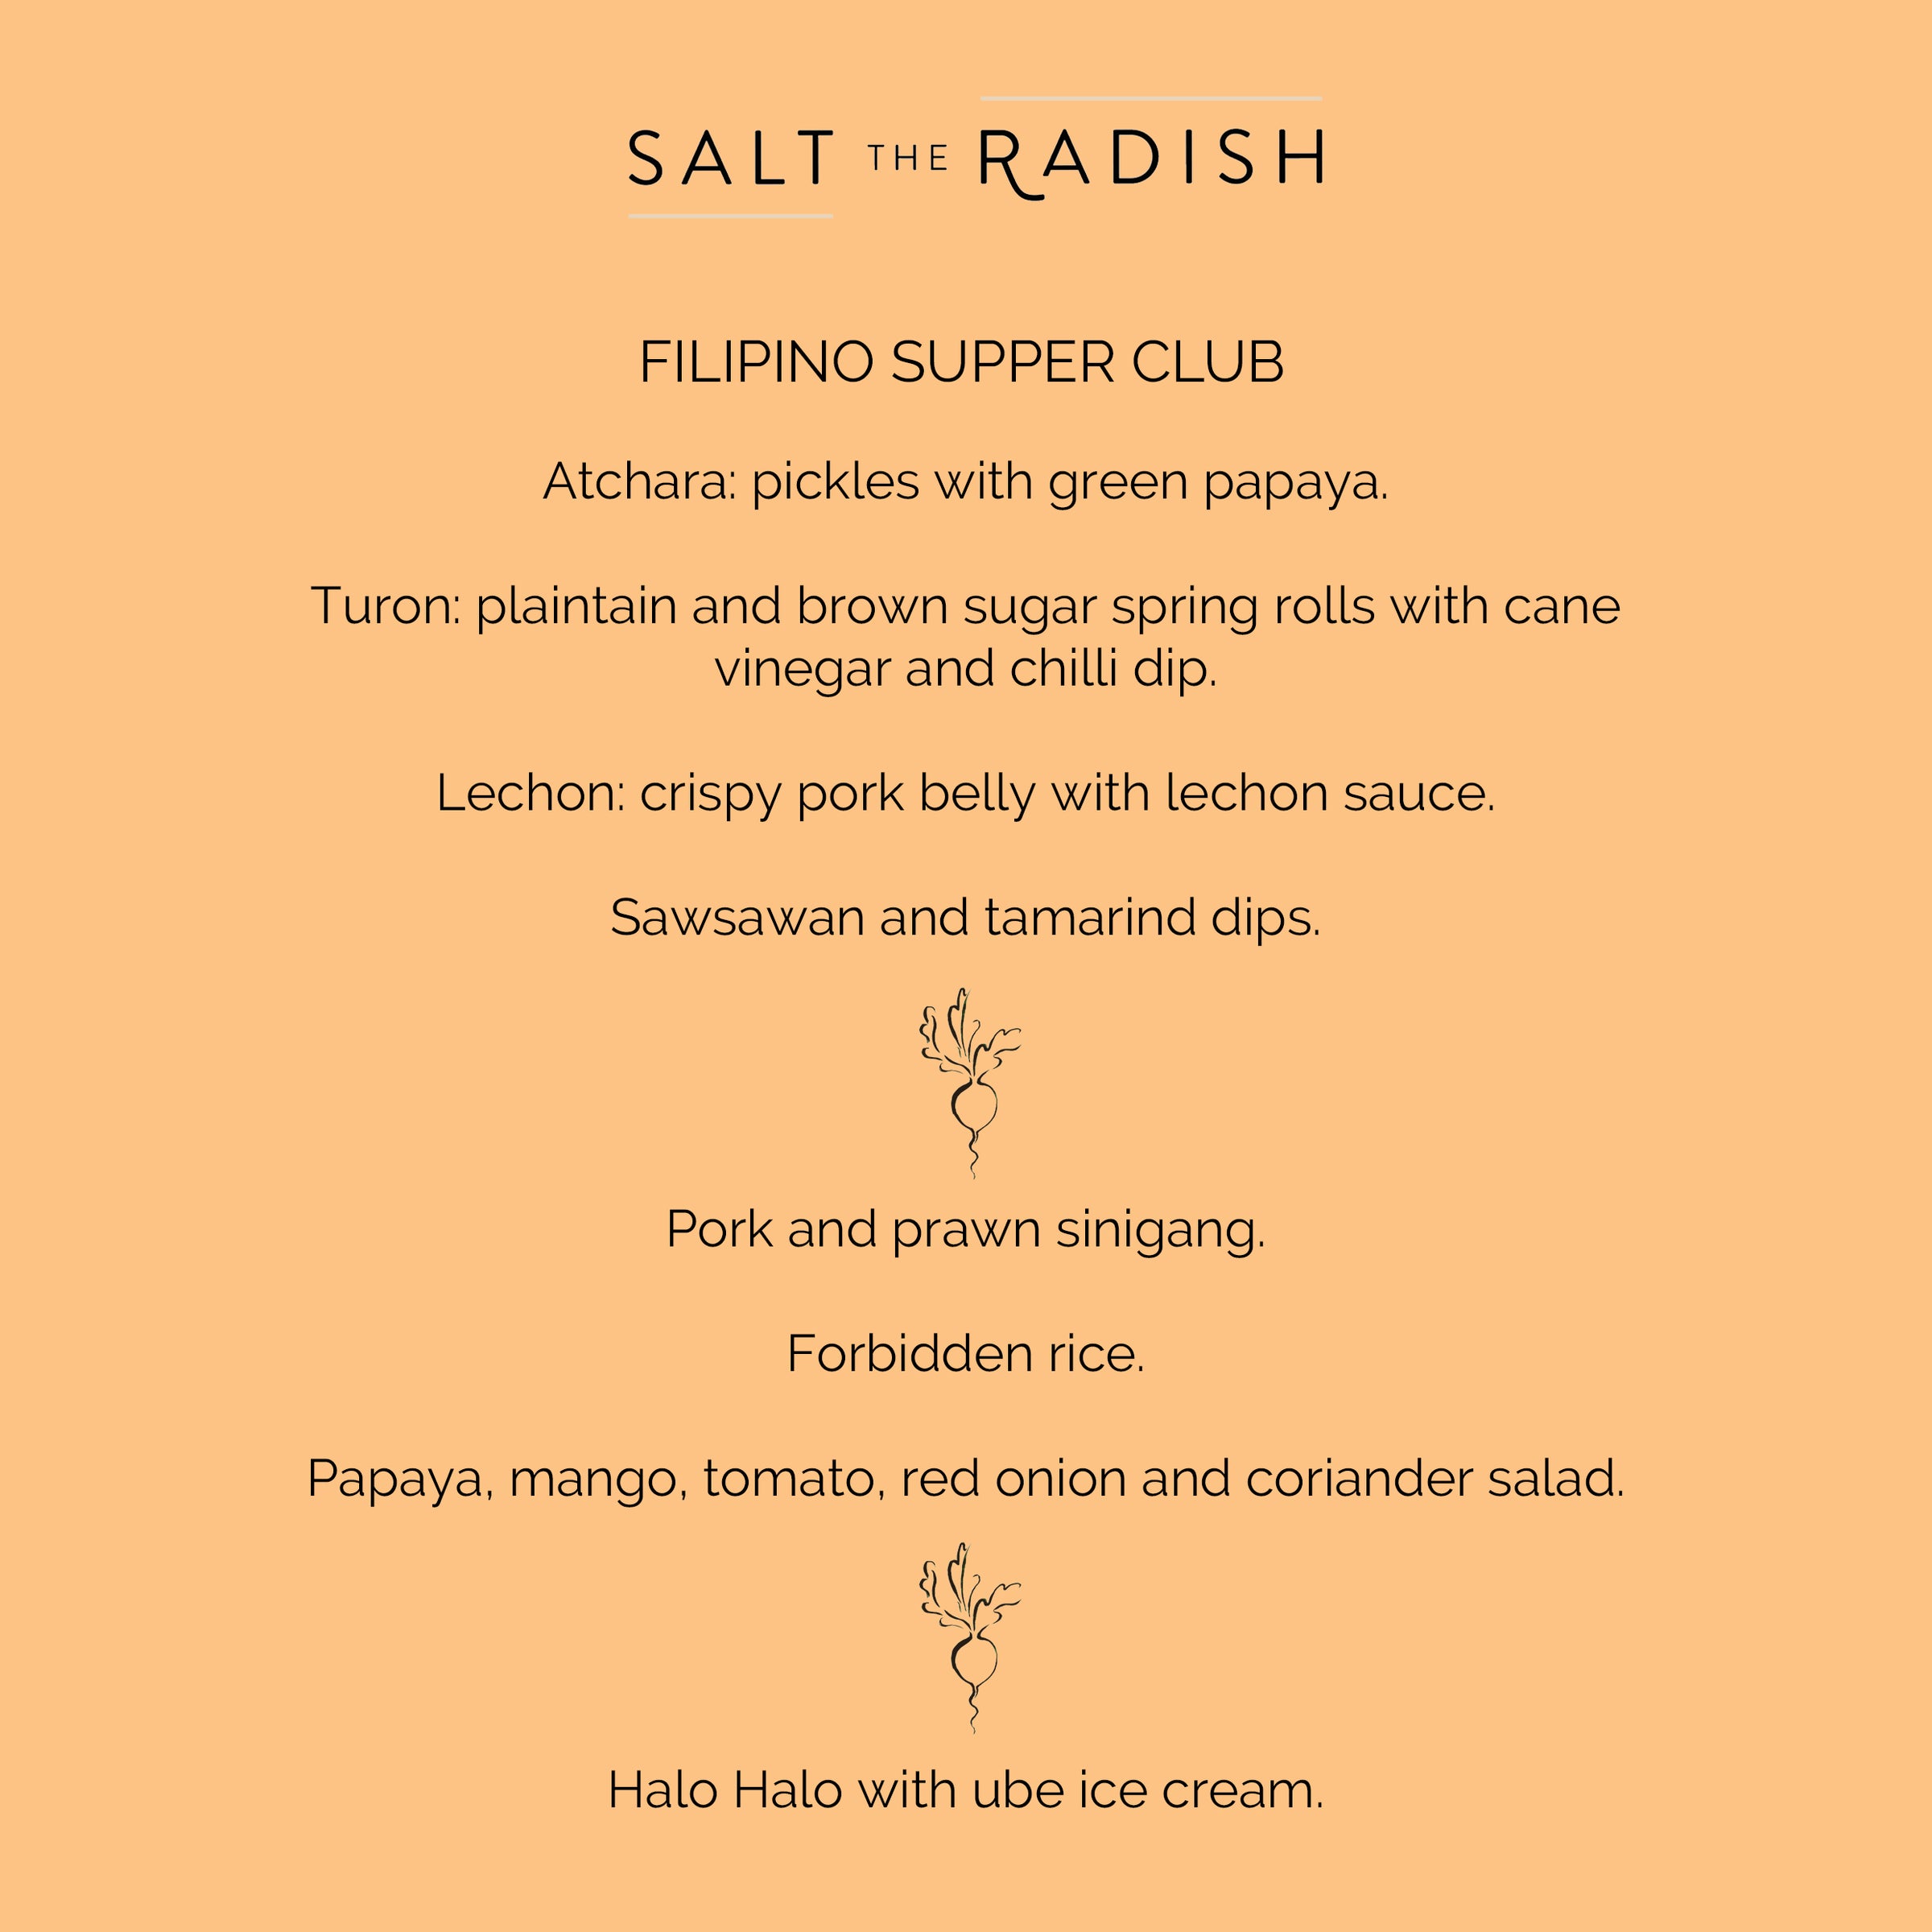 Filipino Supper Club: 23rd March and 20th April